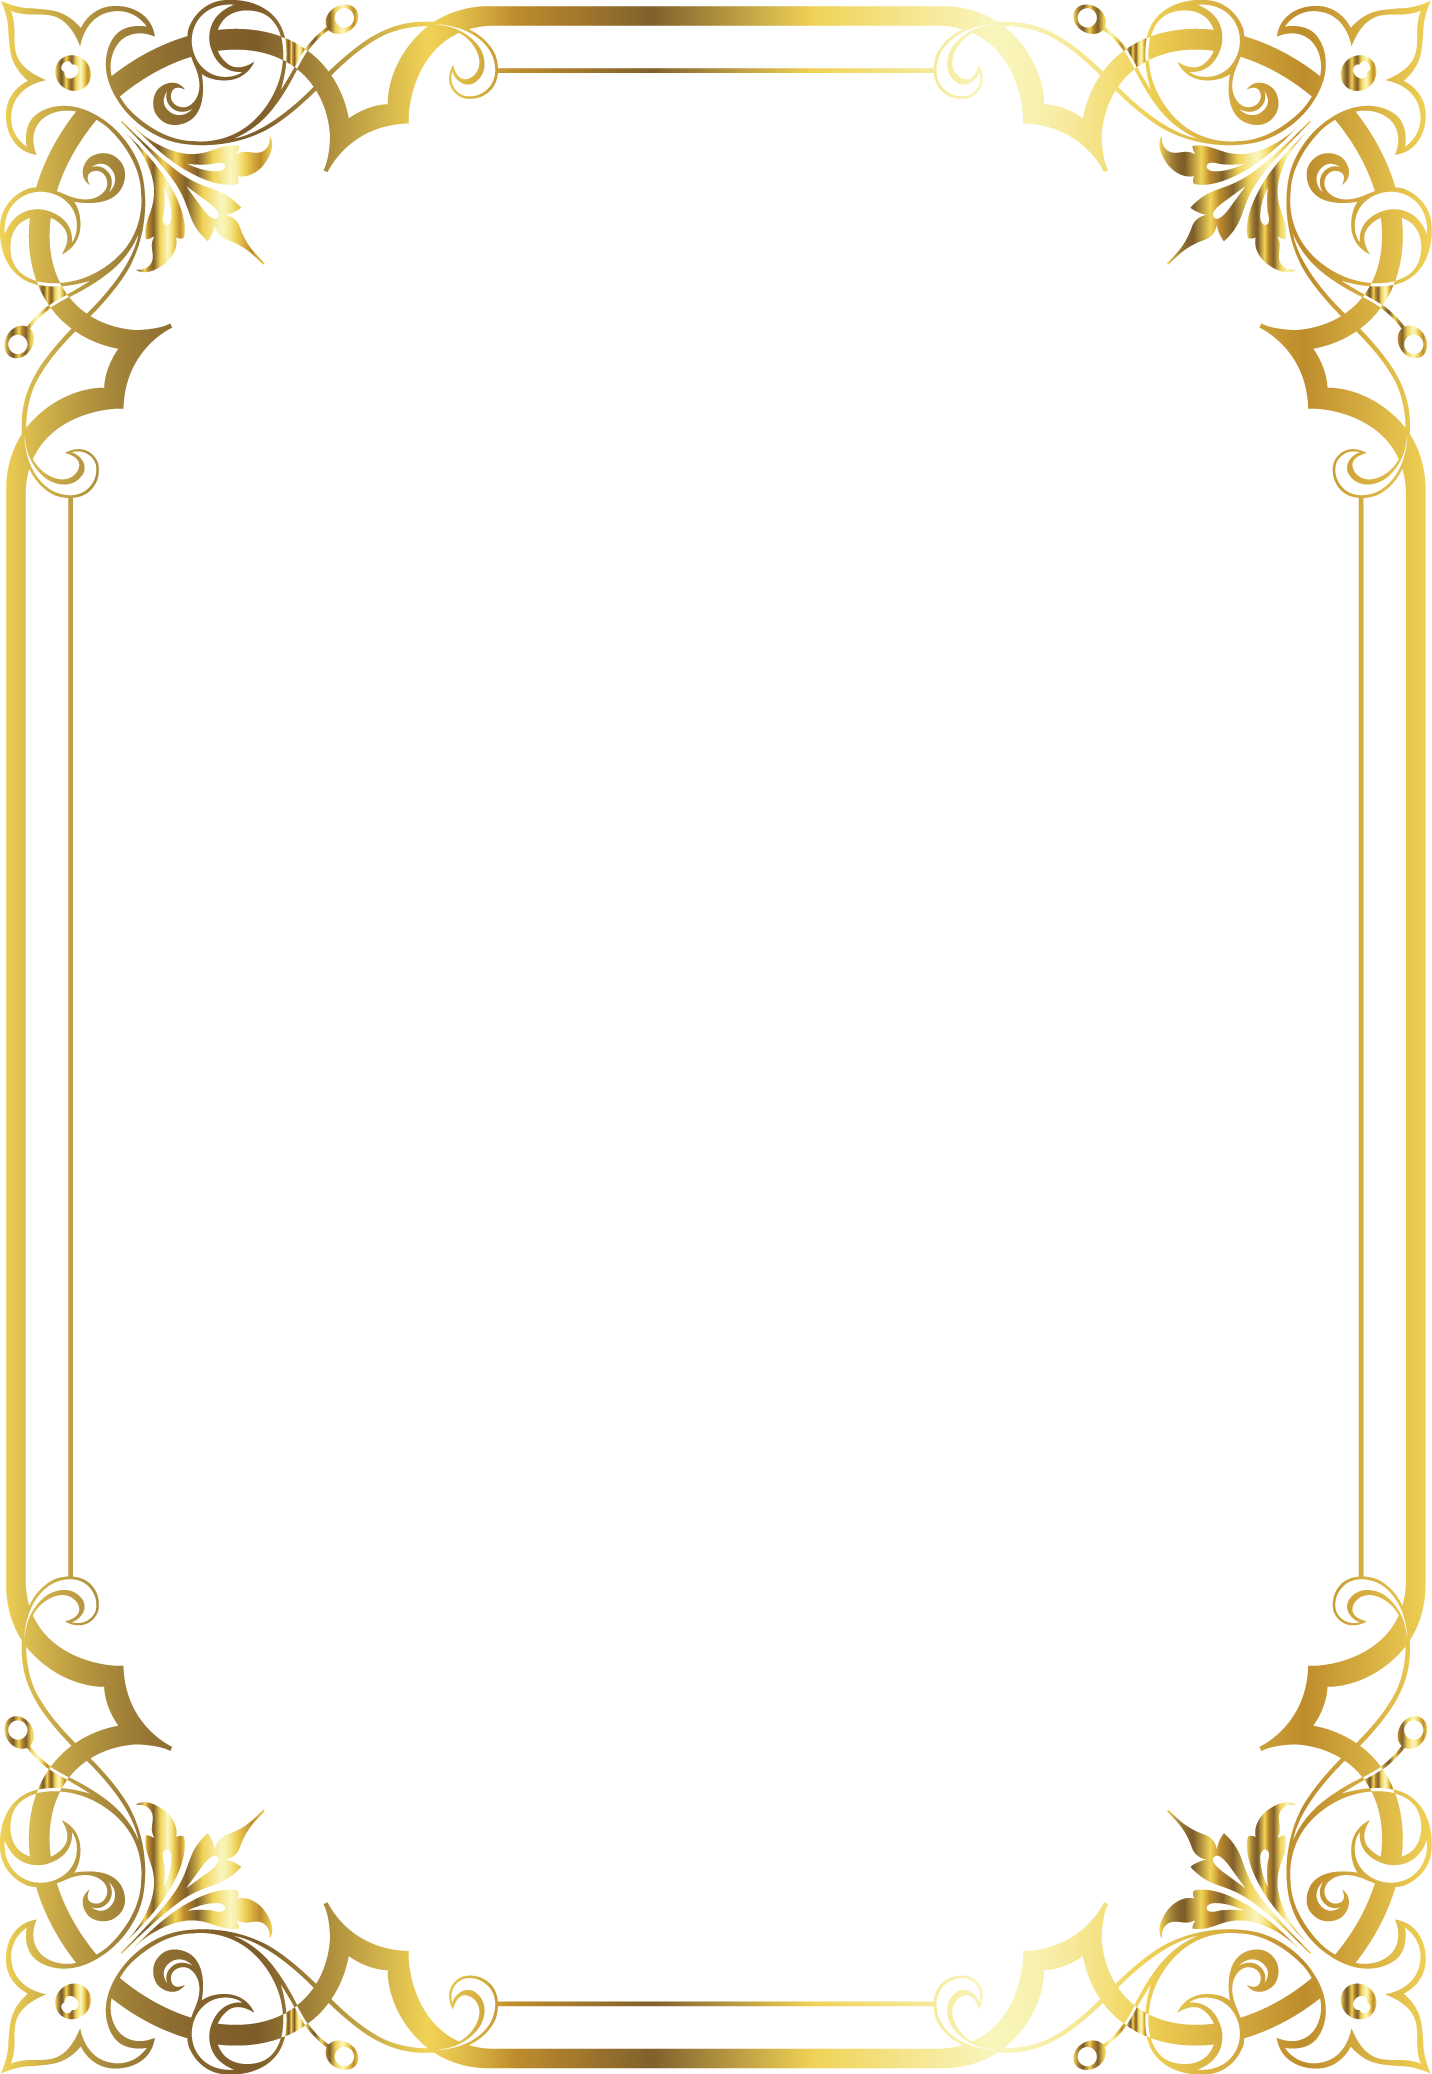 Decorative Frame PNG Clipart